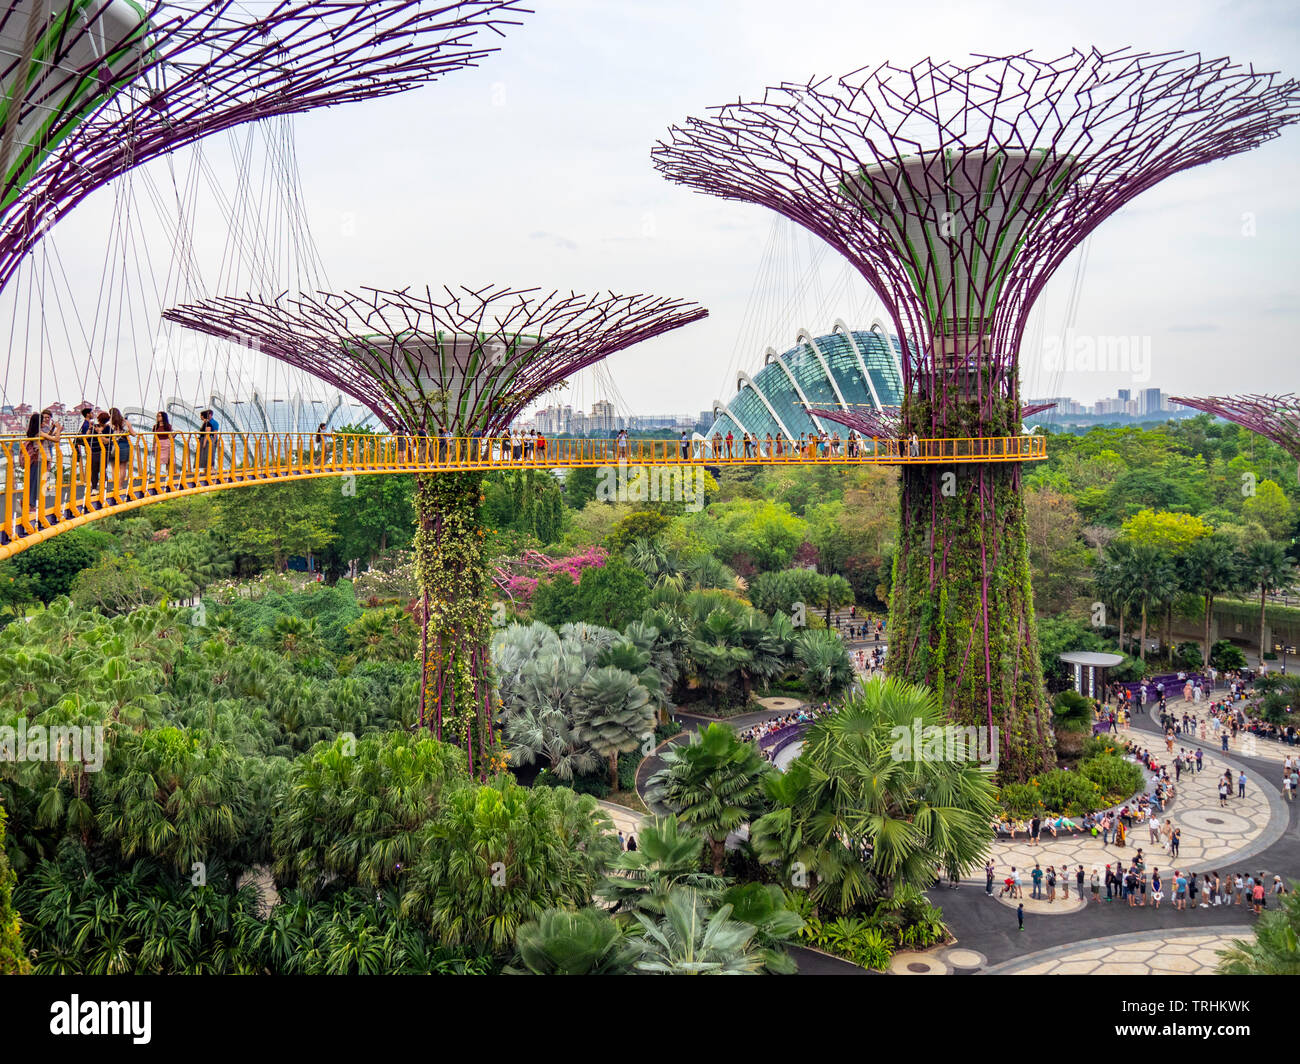 Tourists on the elevated walkway OCBC Skyway between two of the Supertrees  in the Supertree Grove at Gardens by the Bay Singapore. Stock Photo